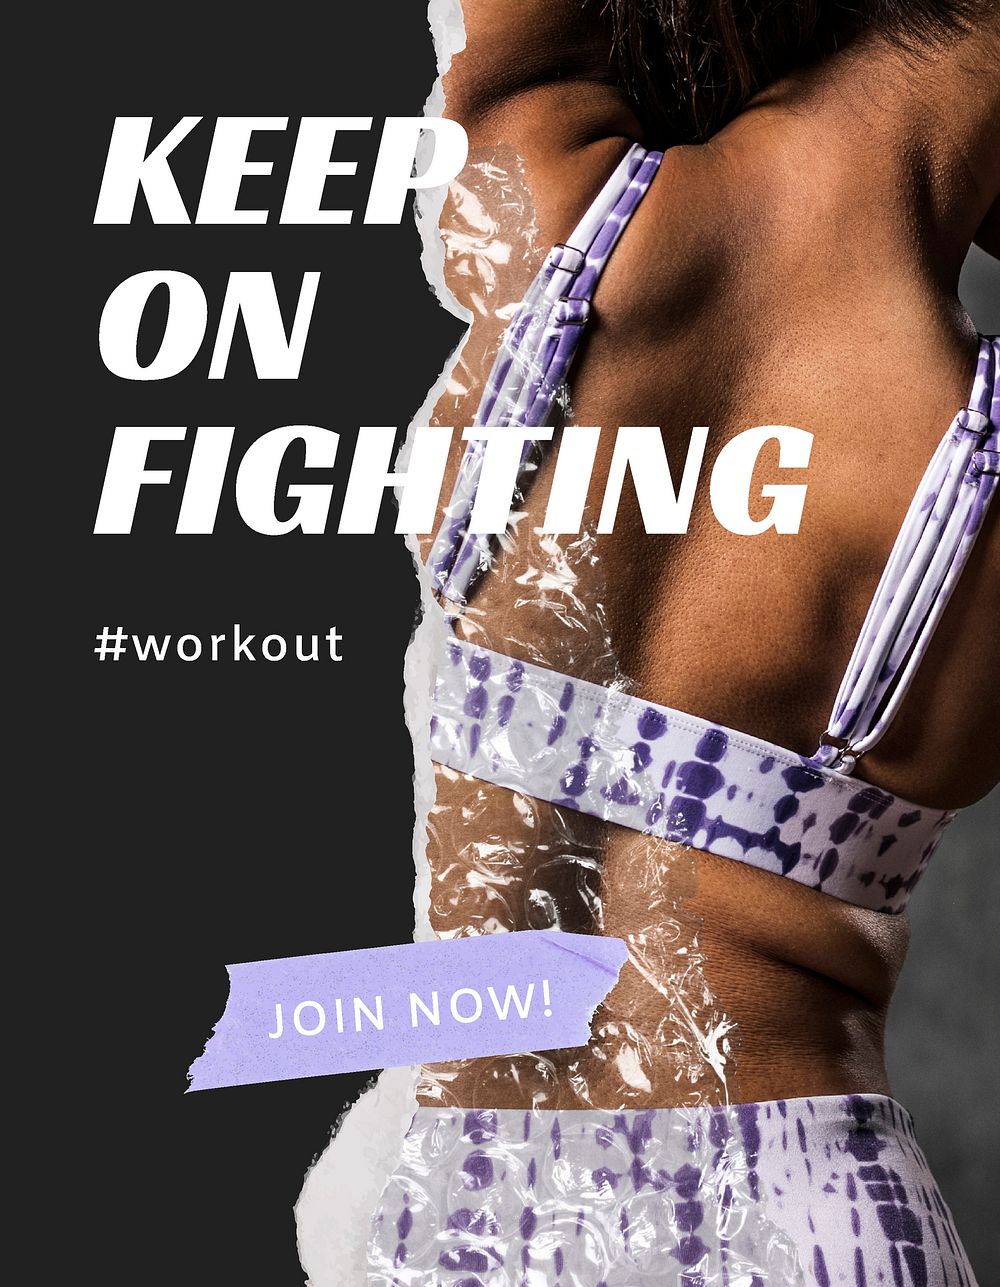 Workout aesthetic flyer template, gym advertisement psd